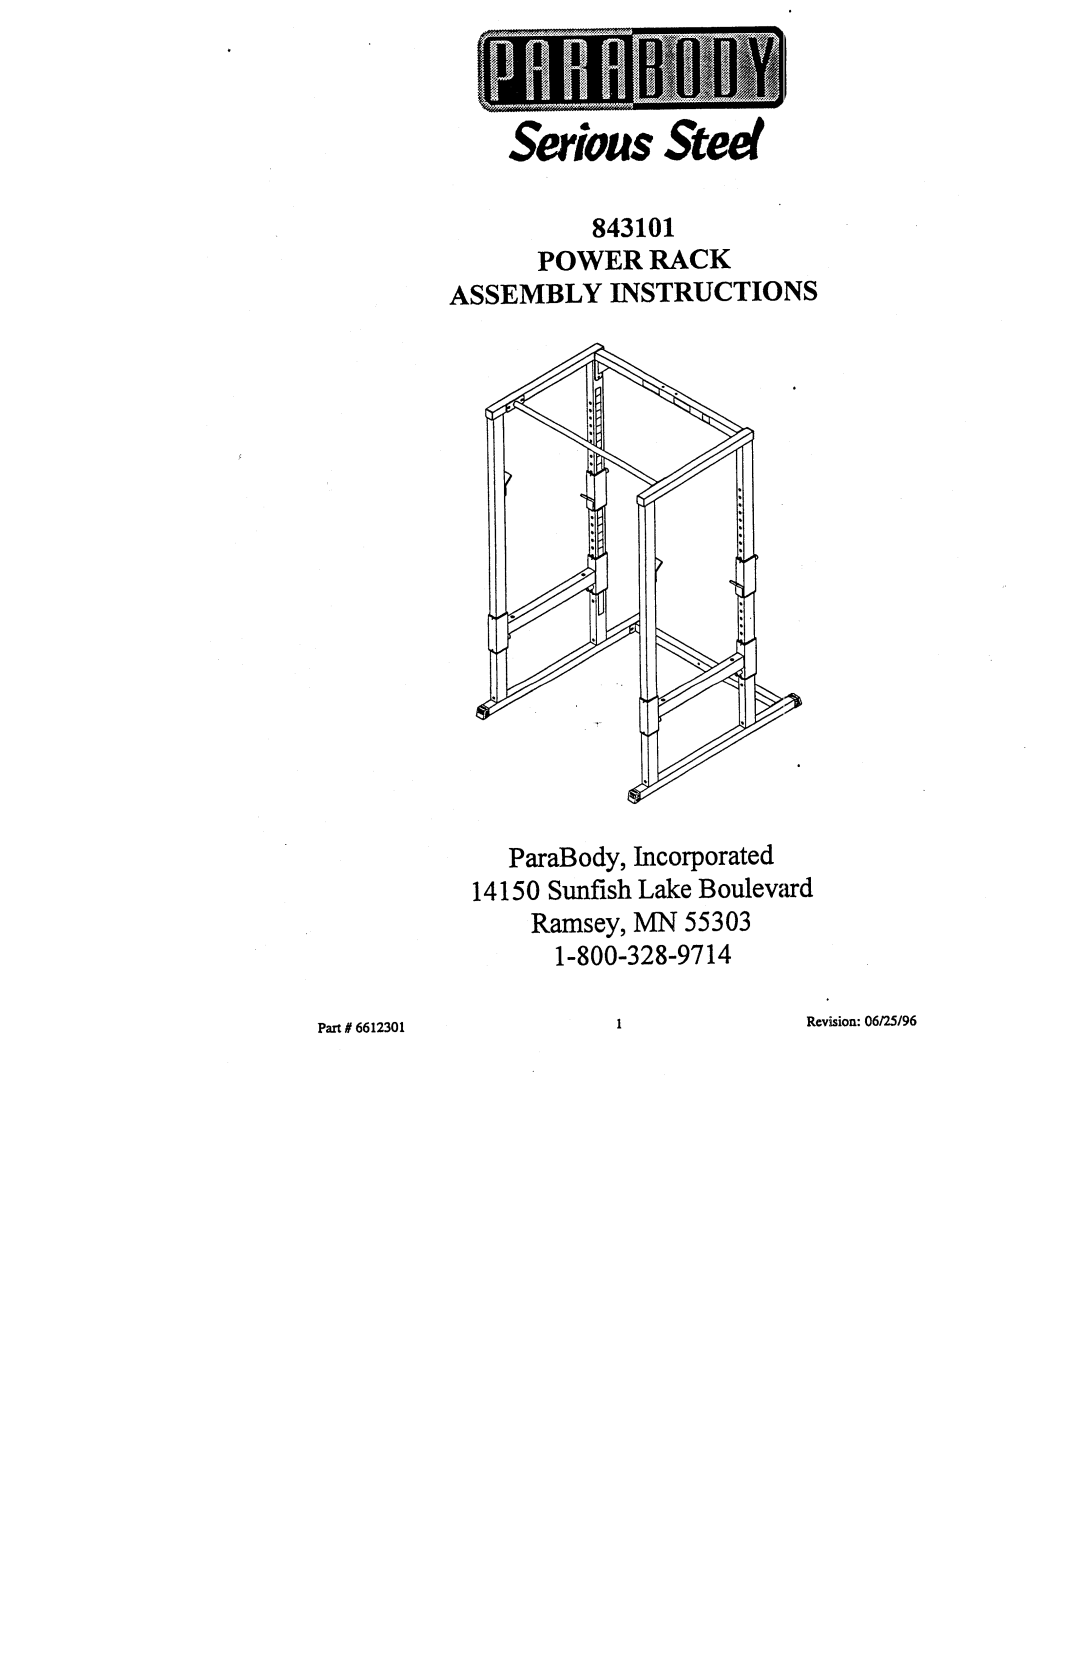 ParaBody 843101 manual SeriousSteel, Power Rack Assembly Instructions 